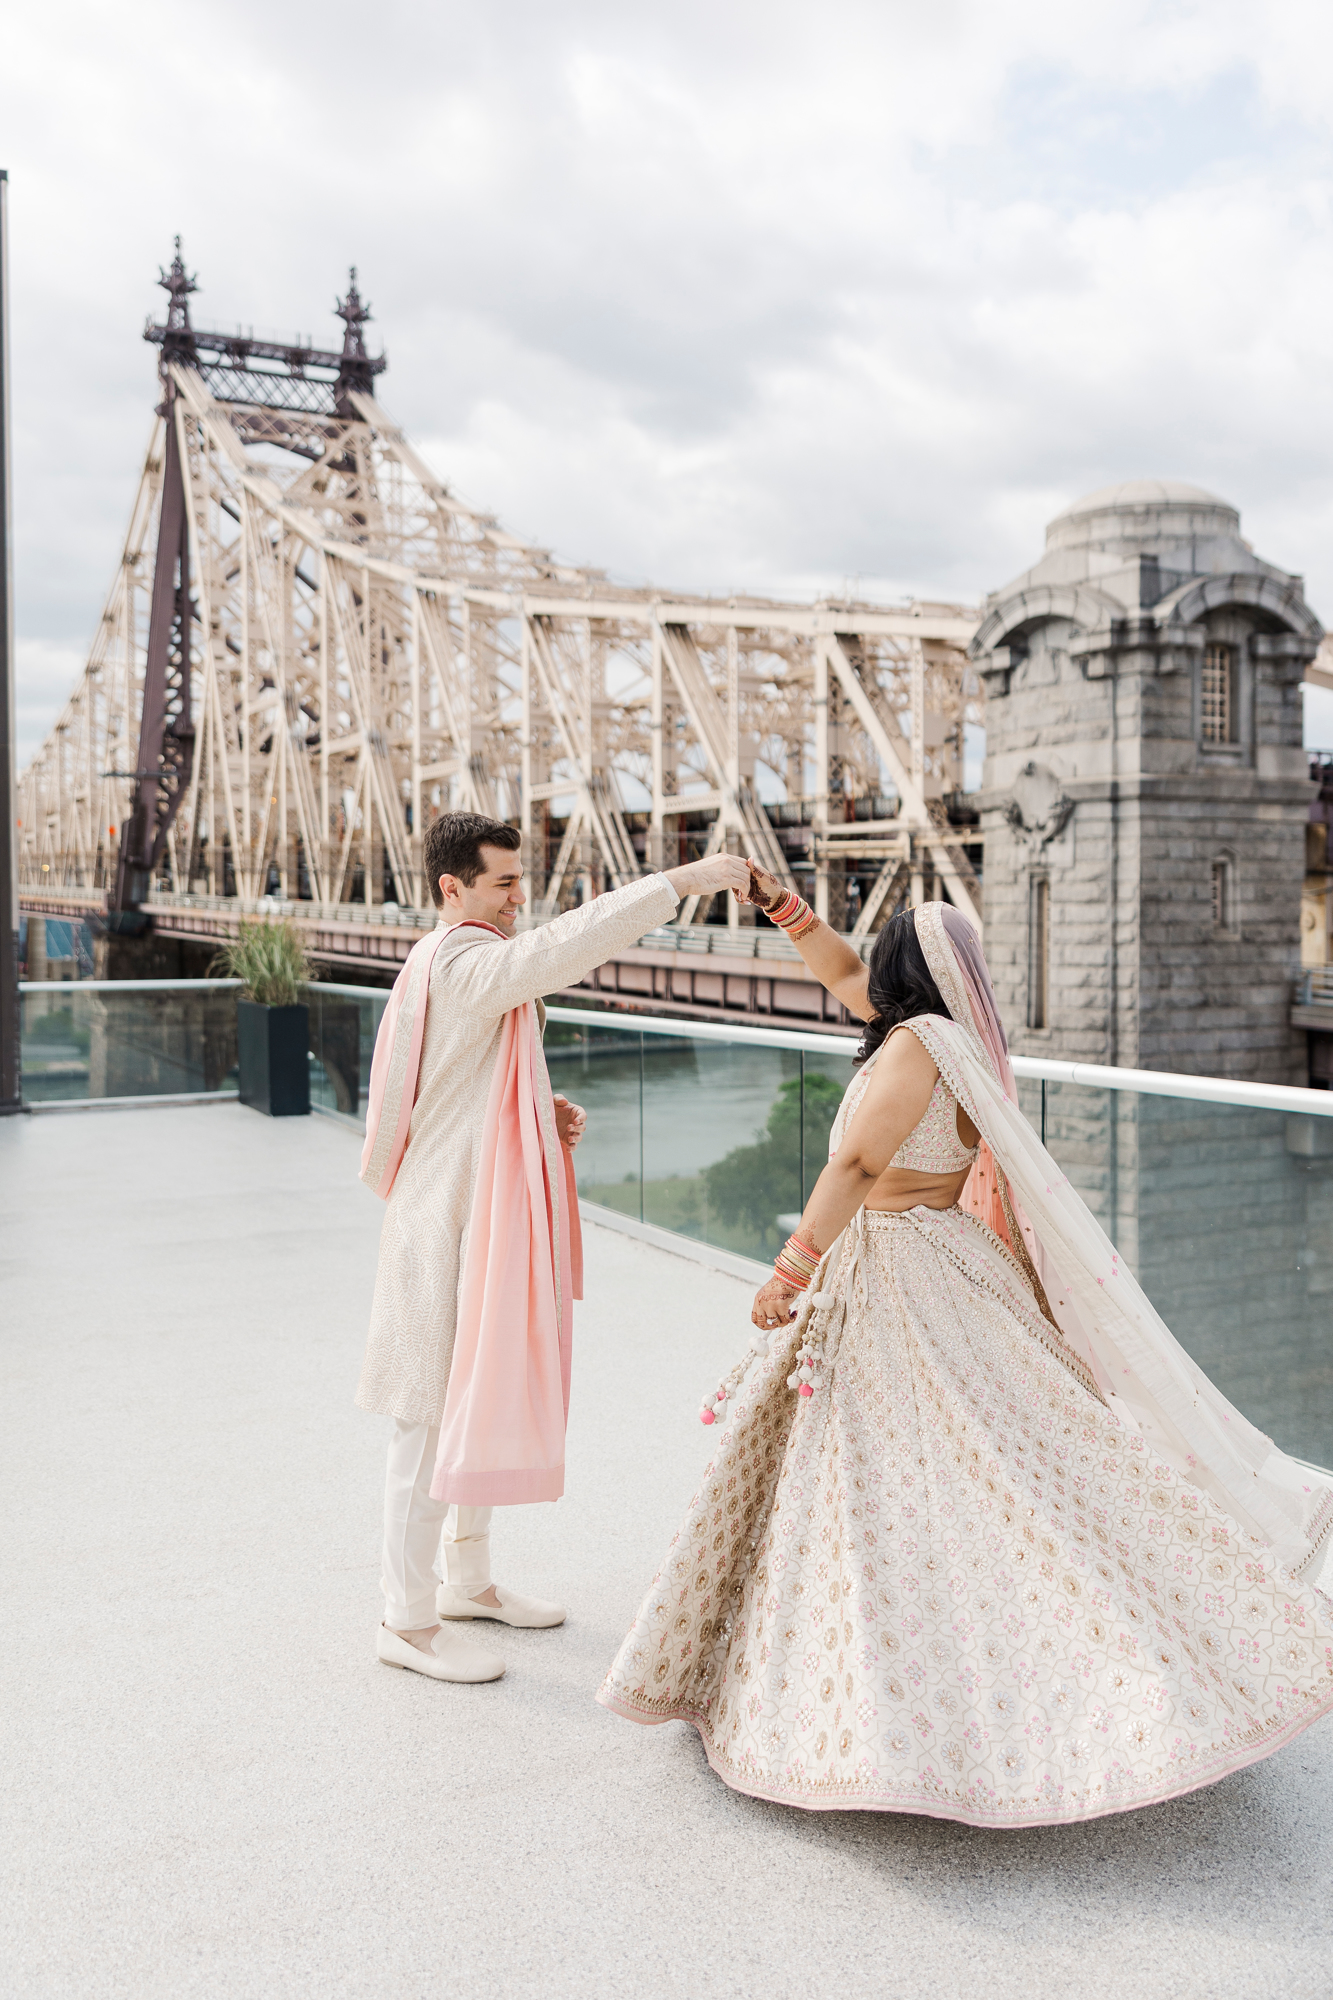 Amazing Ravel Hotel Wedding in a Peachy, Pastel Palette